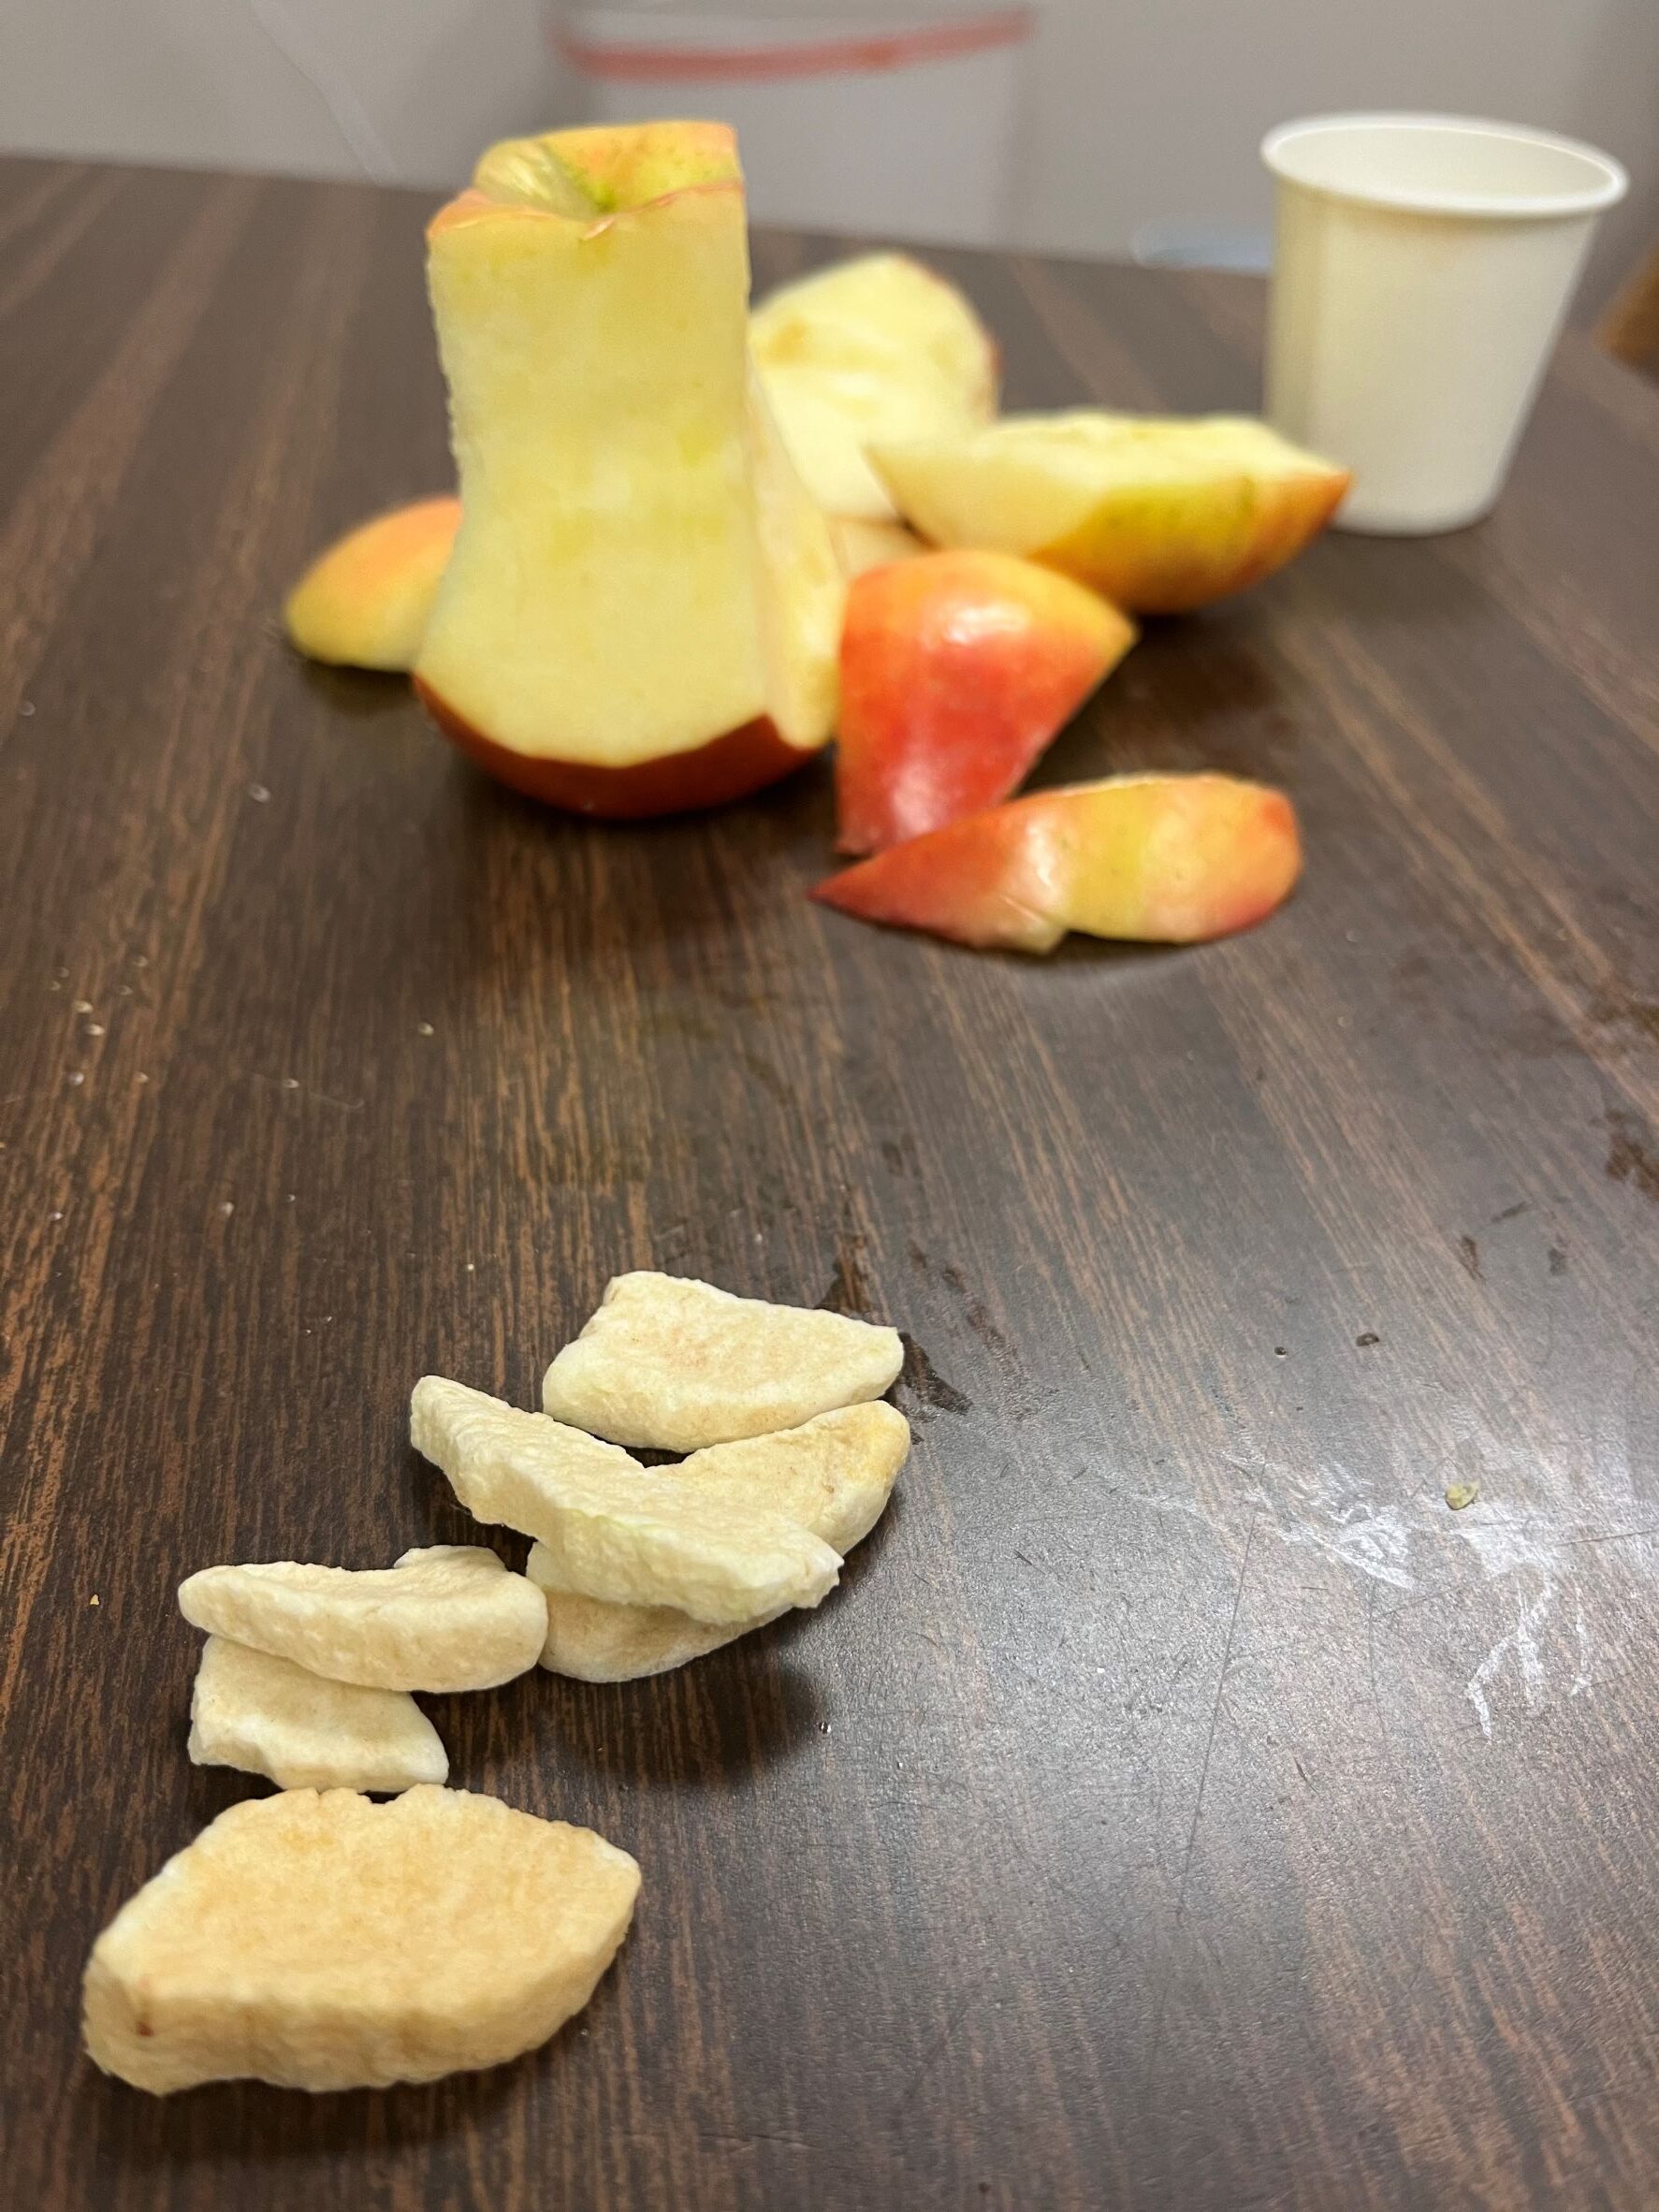 An apple cut into slices next to dehydrated apple slices on a table.